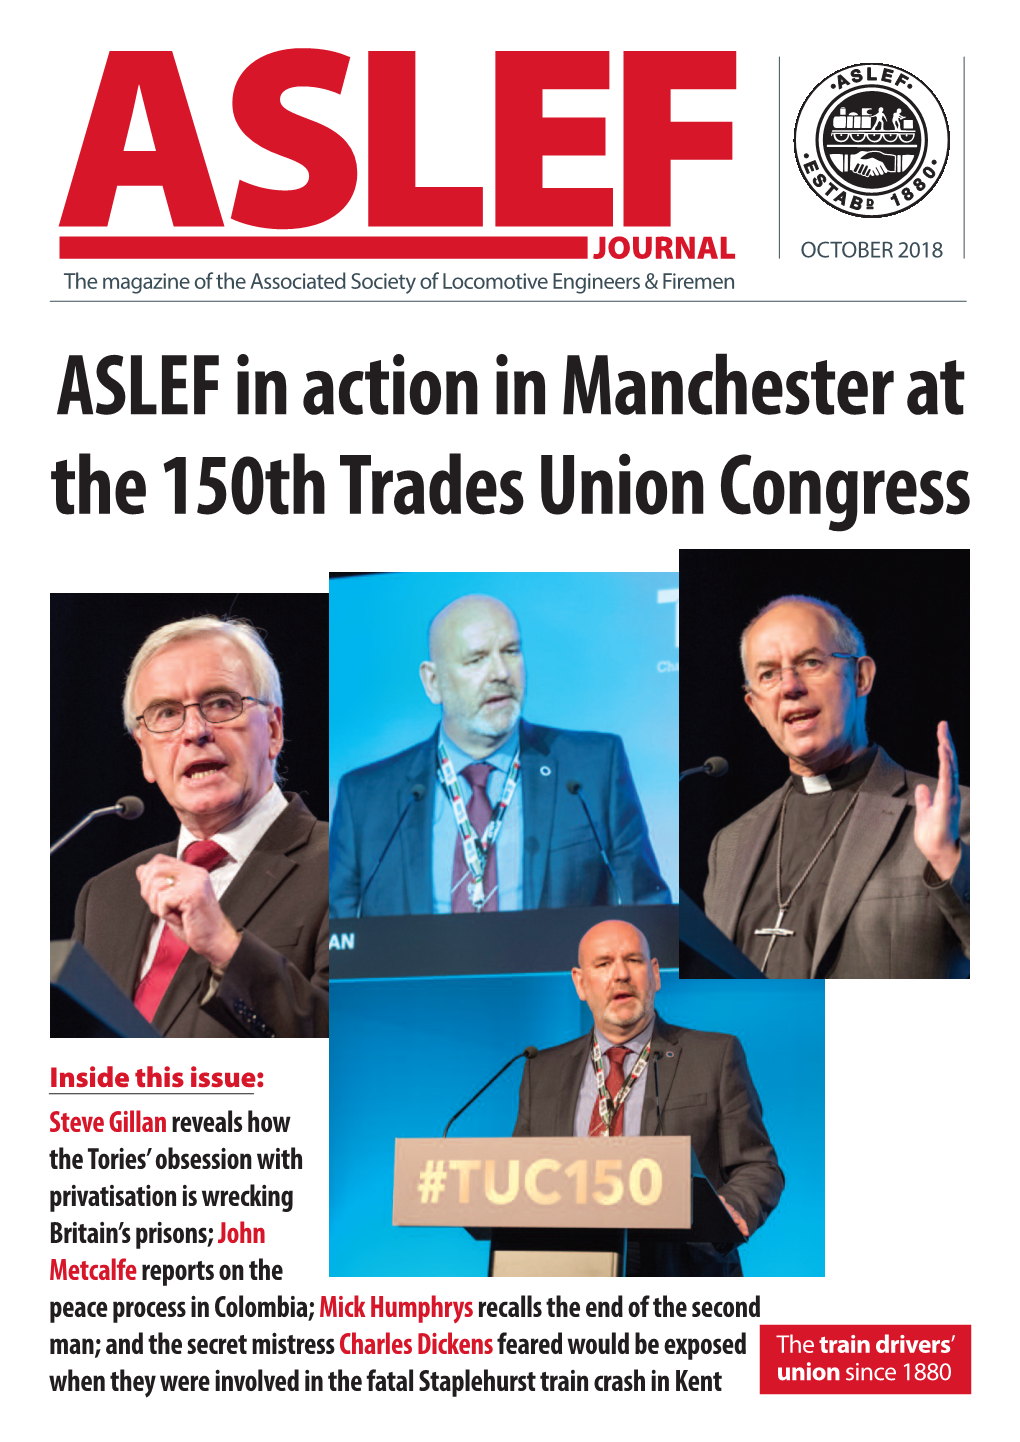 ASLEF in Action in Manchester at the 150Th Trades Union Congress